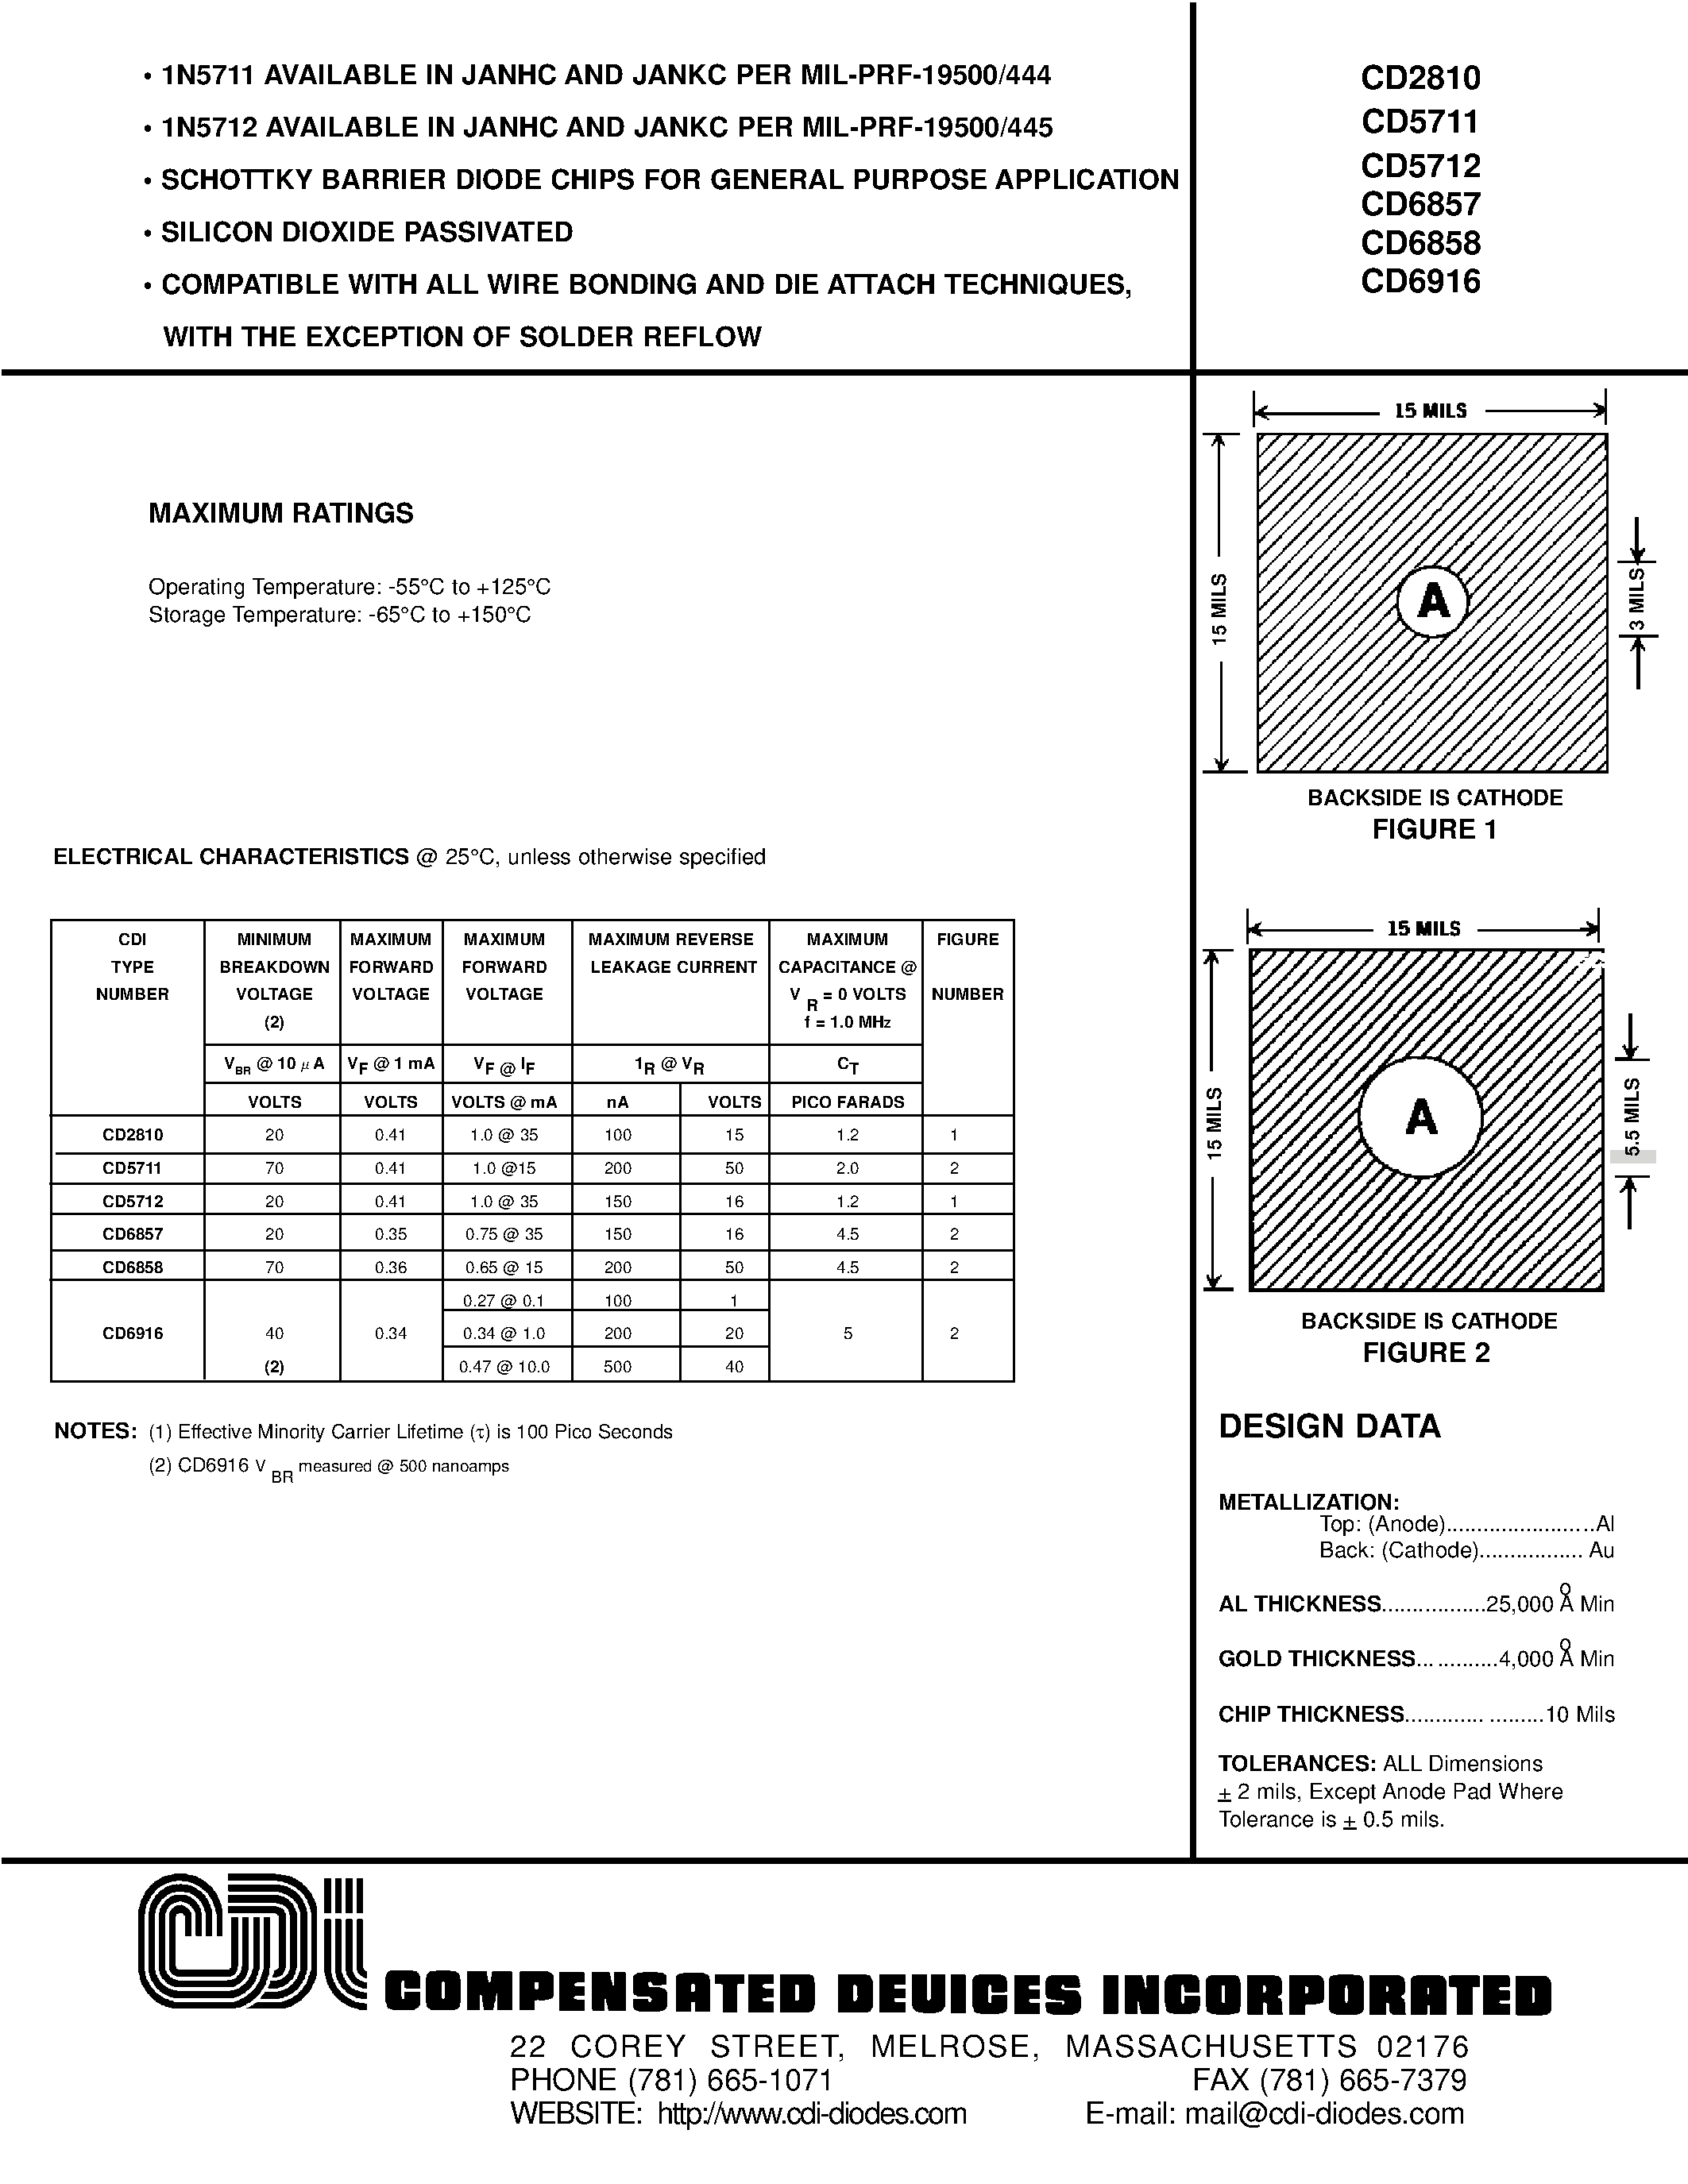 Datasheet CD2810 - SCHOTTKY BARRIER DIODE CHIPS FOR GENERAL PURPOSE APPLICATION page 1